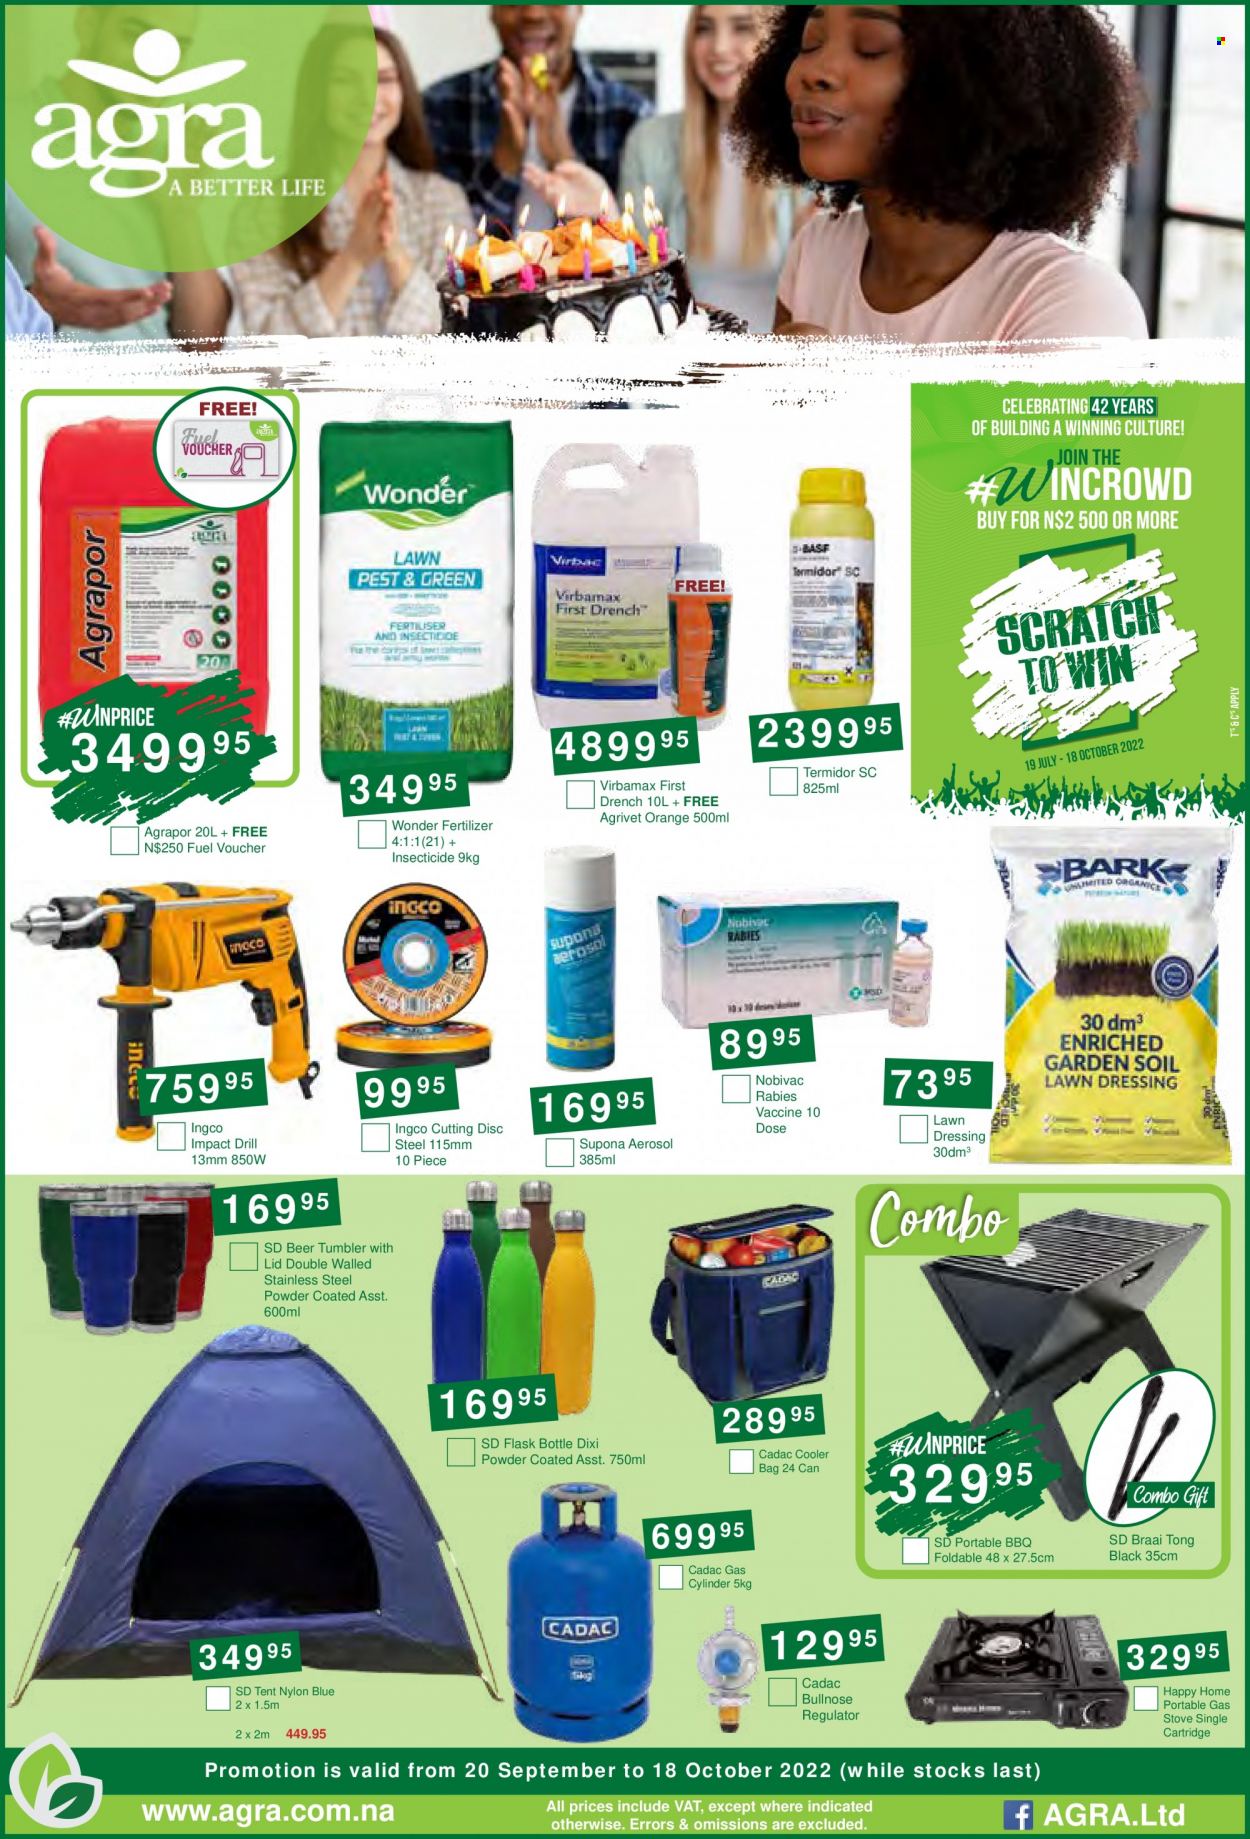 thumbnail - Agra catalogue  - 20/09/2022 - 18/10/2022 - Sales products - bag, stove, drill, tong, braai, portable barbecue, fertilizer, tent. Page 1.